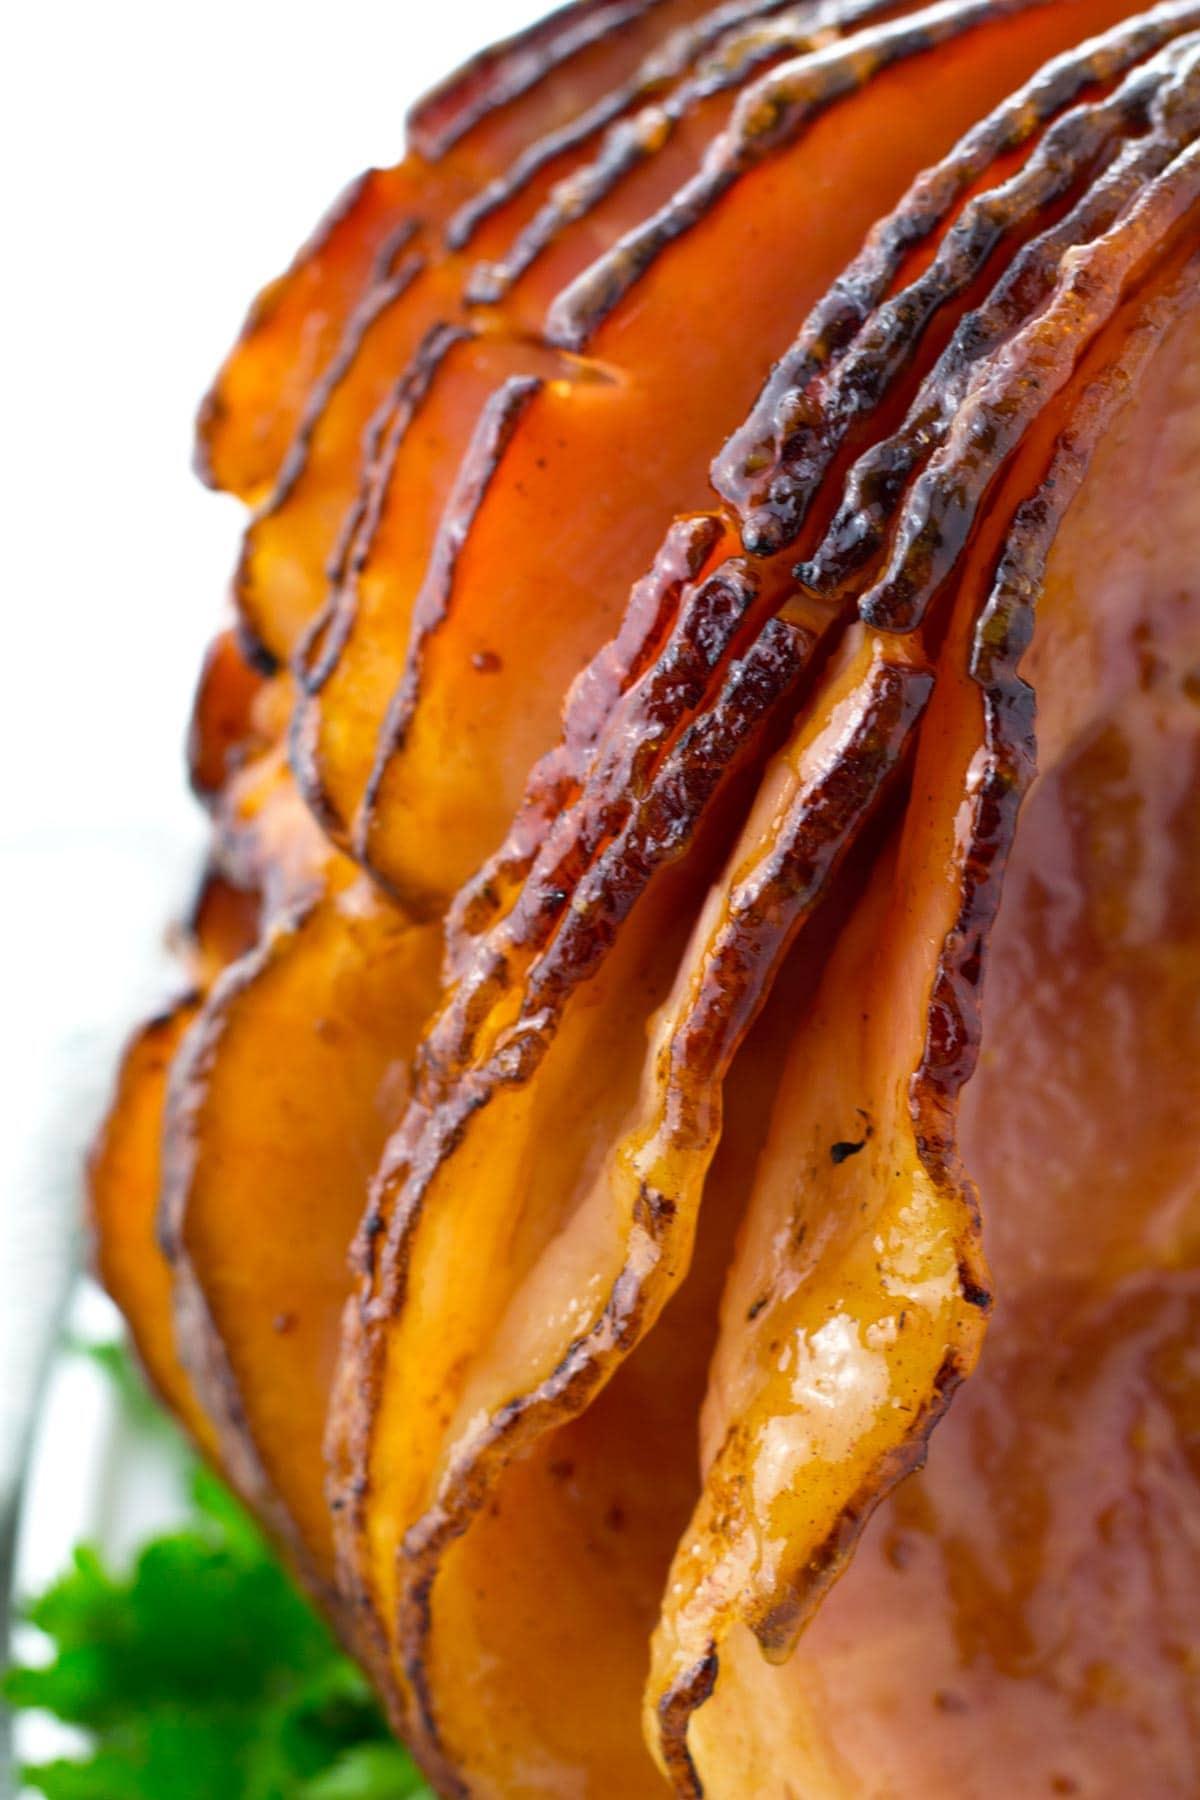 Juicy and moist slices of roaster ham.